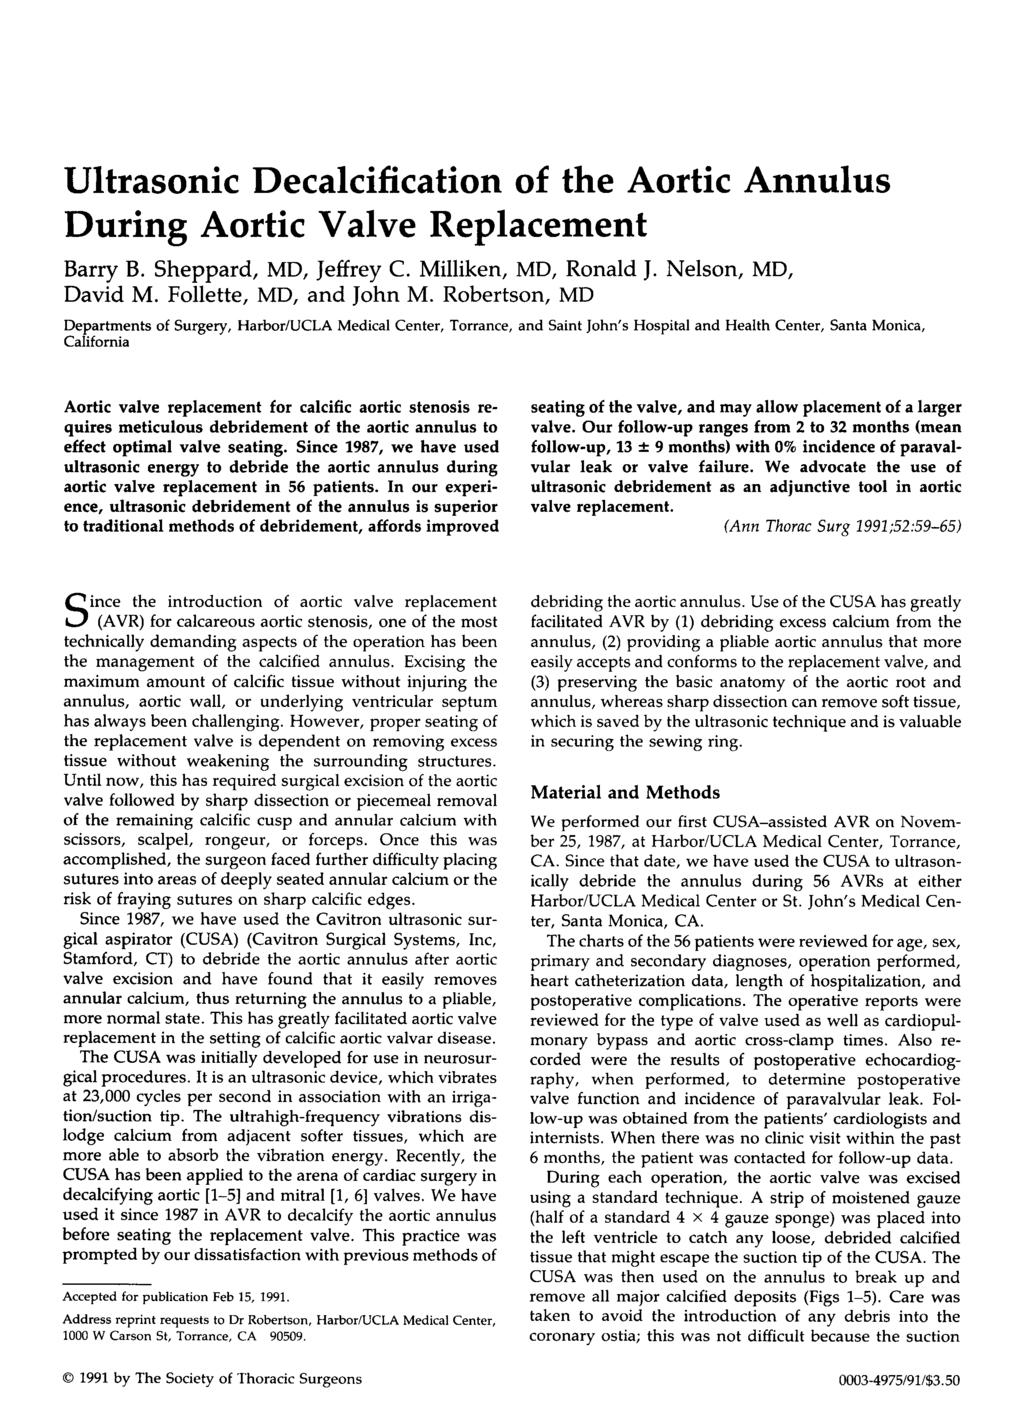 Ultrasonic Decalcification of the Aortic Annulus During Aortic Valve Replacement Barry B. Sheppard, MD, Jeffrey C. Milliken, MD, Ronald J. Nelson, MD, David M. Follette, MD, and John M.